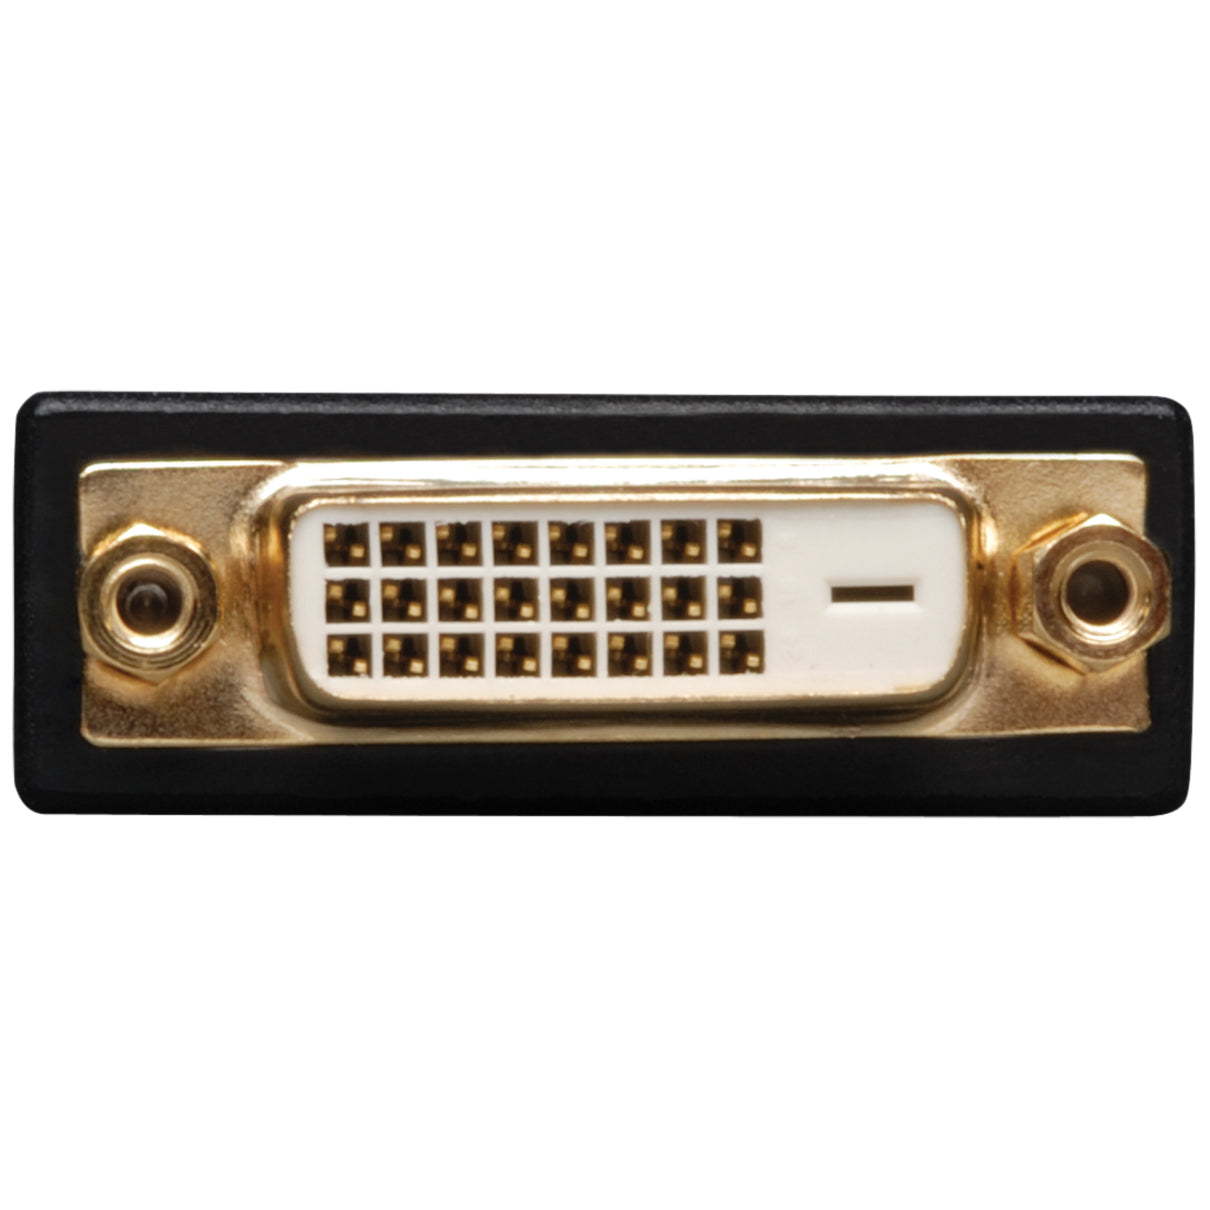 Tripp Lite P132-000 DVI to HDMI Gold Adapter, Molded, Gold Plated Connectors